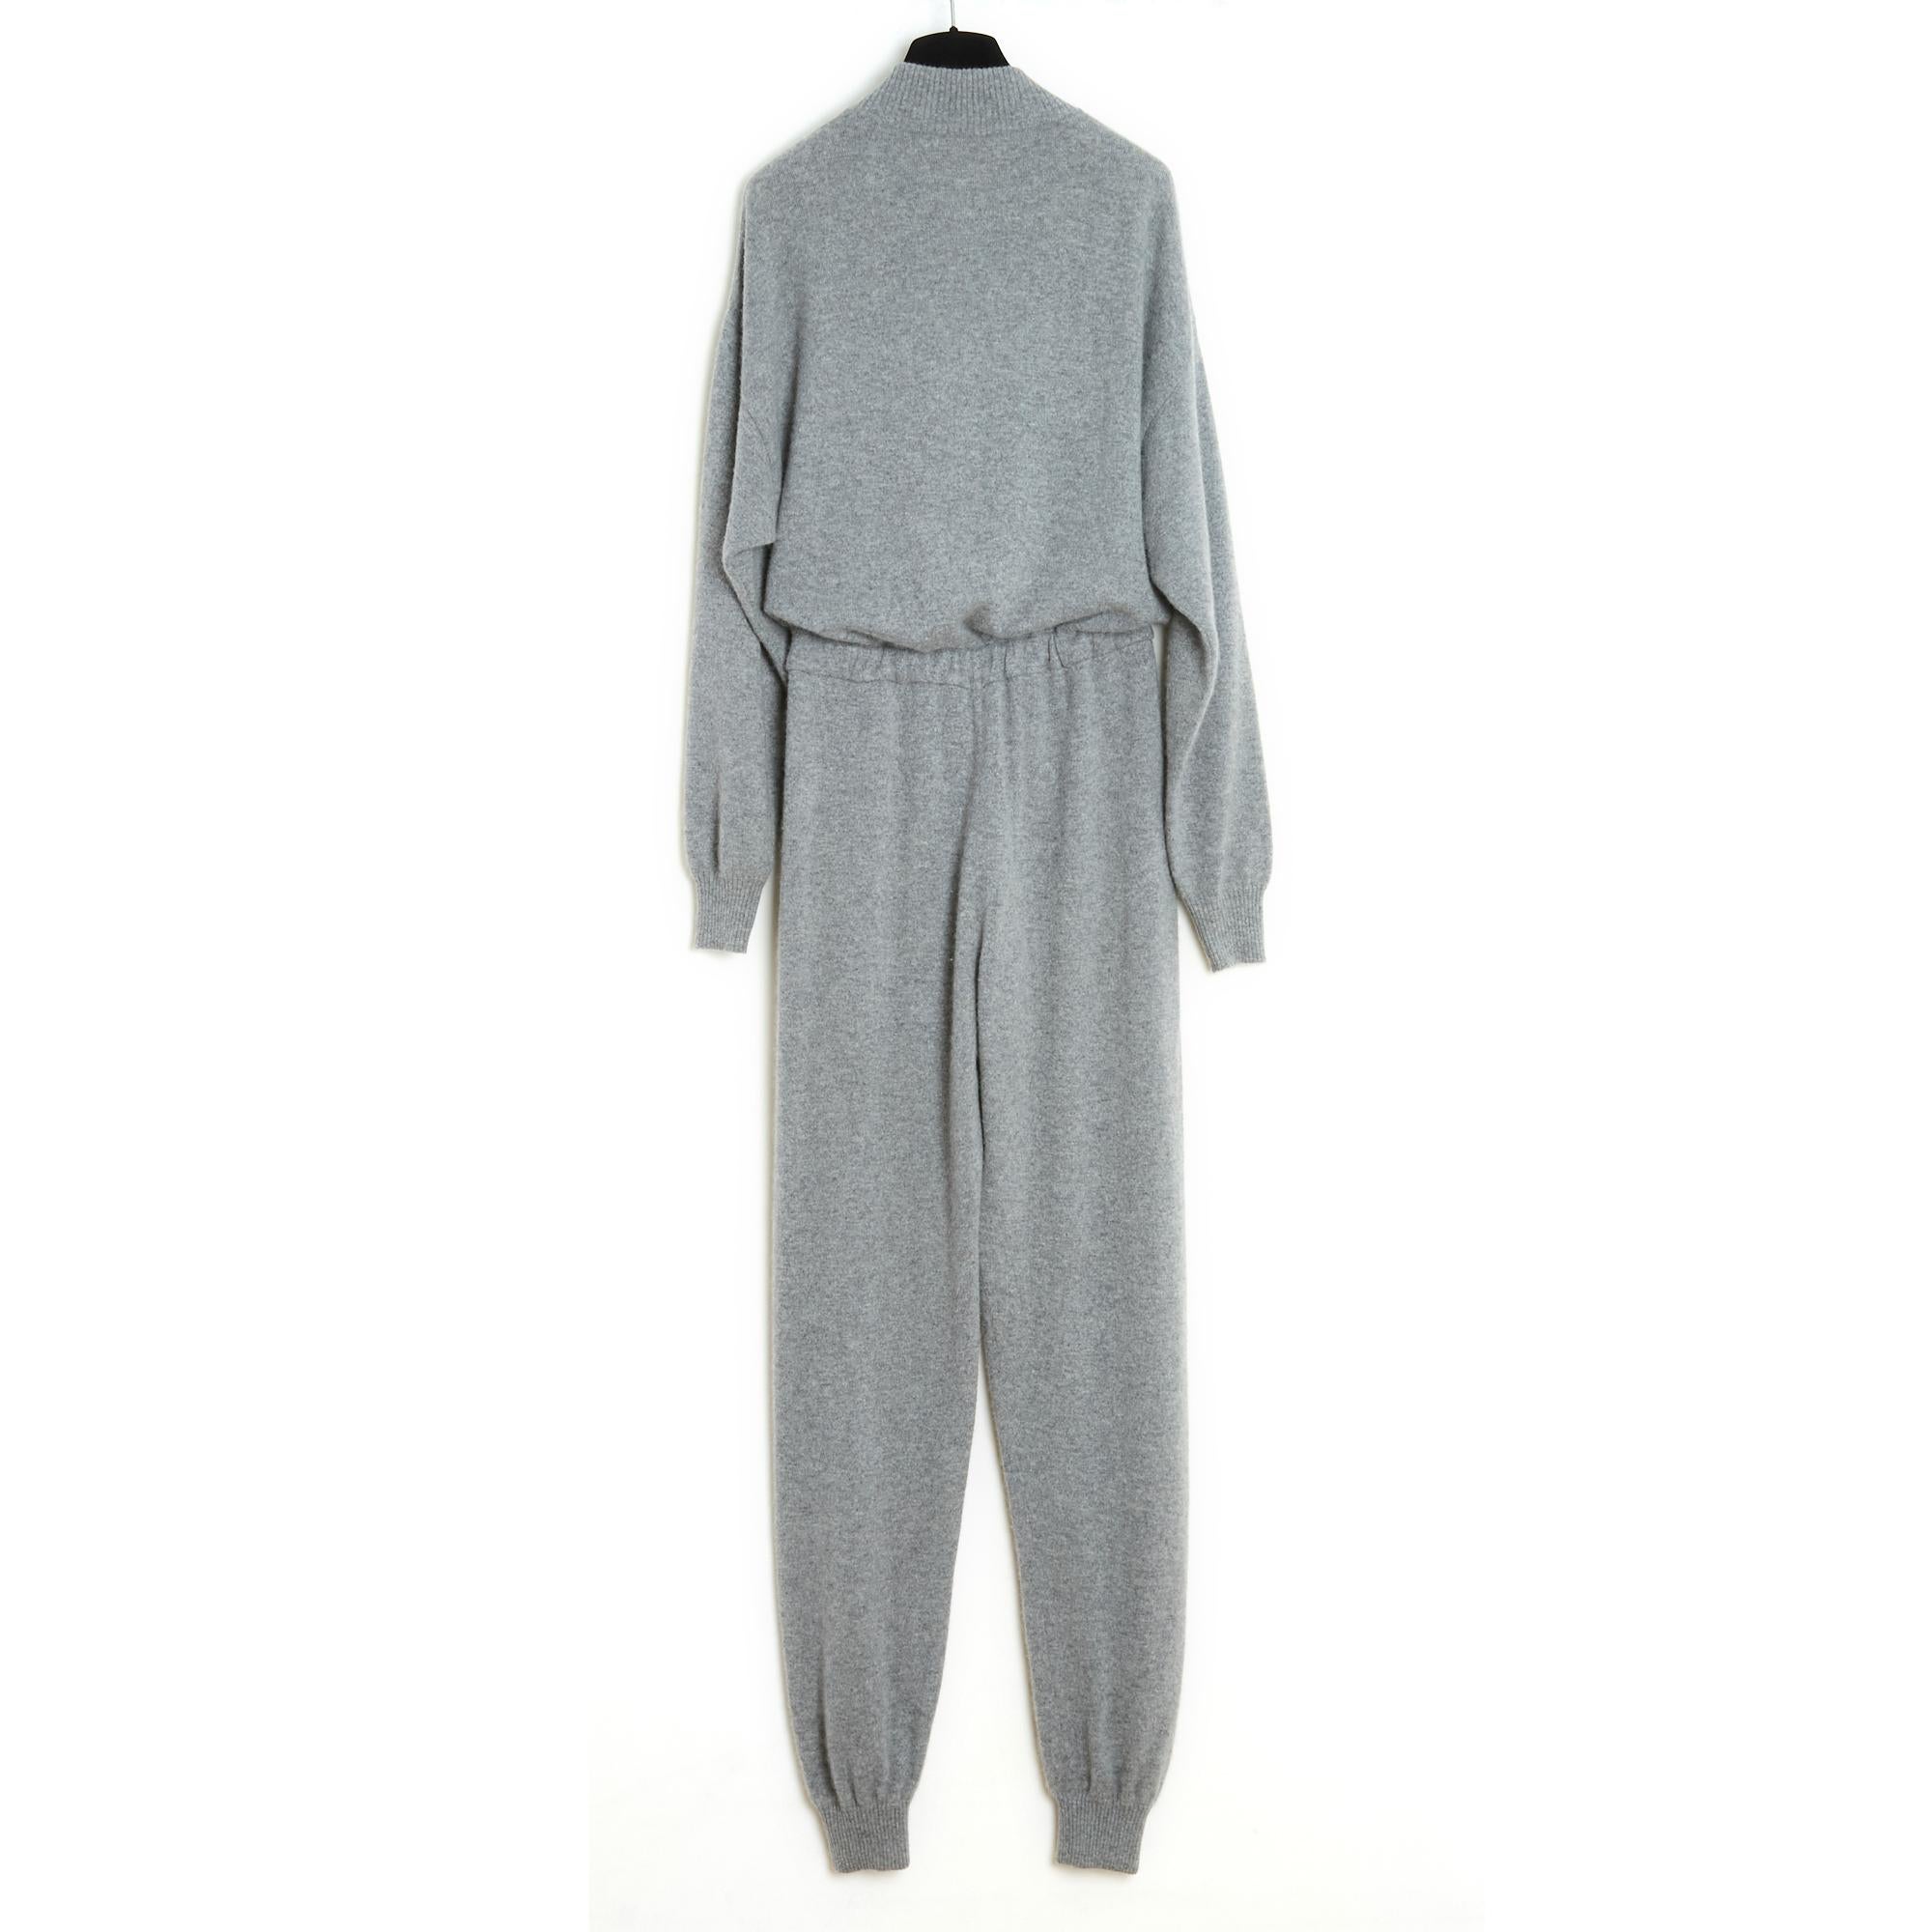 FW1991 Chanel Iconic Grey Cashmere Jumpsuit FR38/40 Pristine For Sale 3